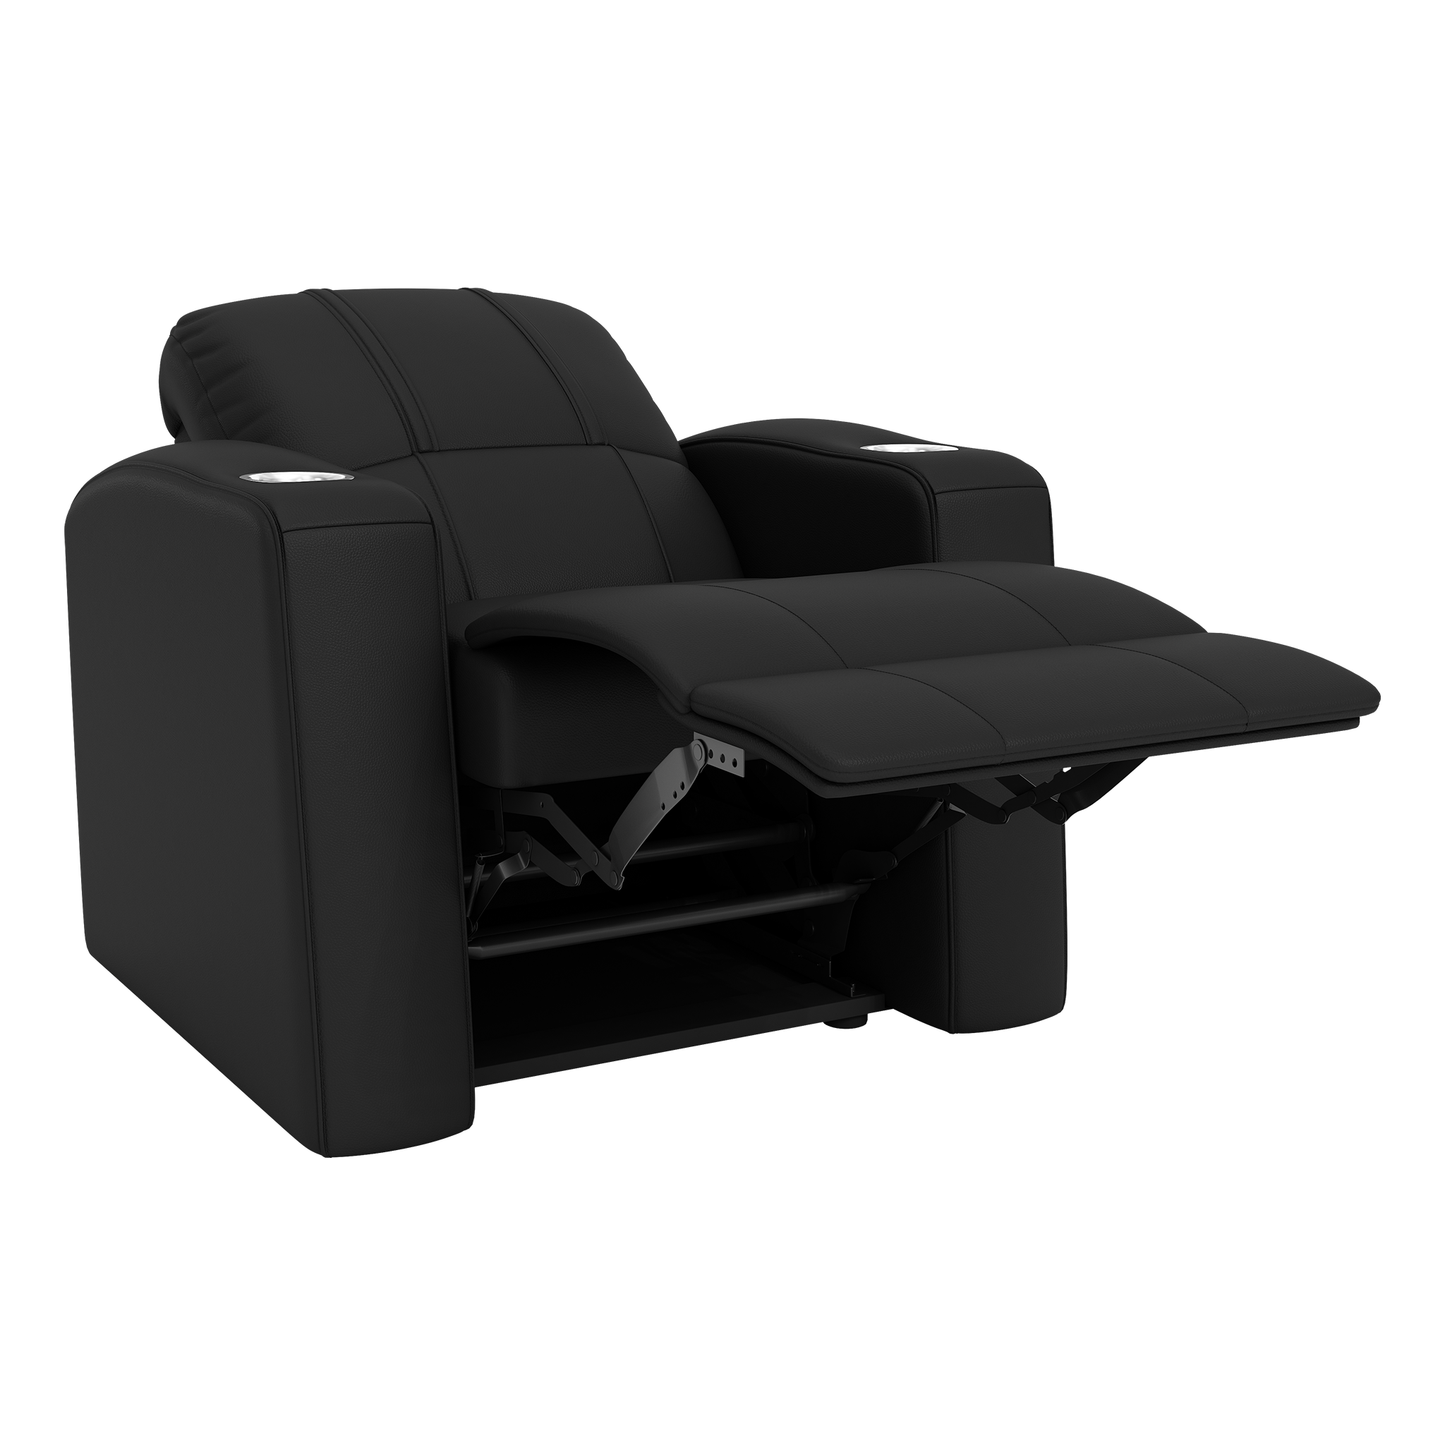 Relax Home Theater Recliner with Fan Controlled Football League Logo